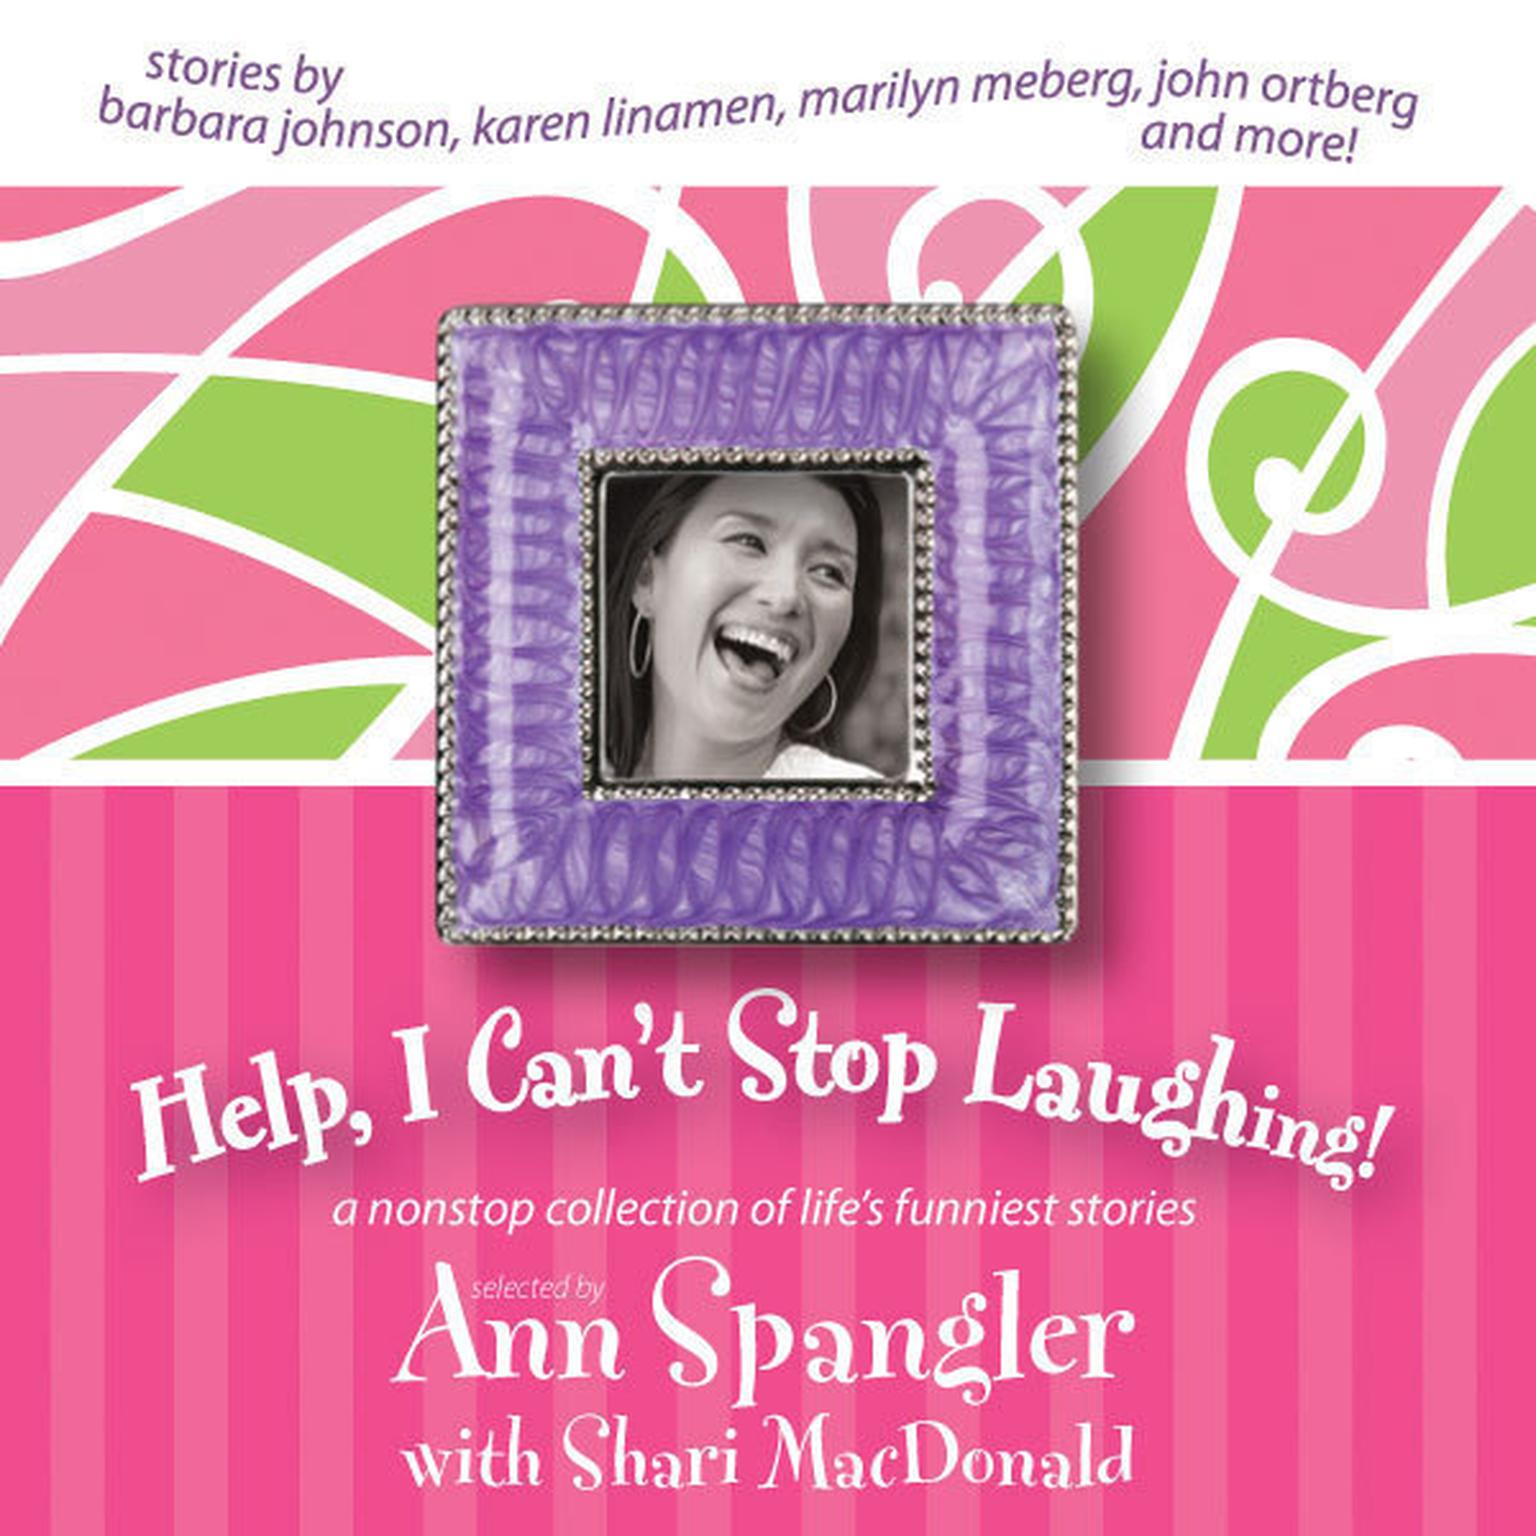 Help, I Cant Stop Laughing!: A Nonstop Collection of Lifes Funniest Stories Audiobook, by Ann Spangler